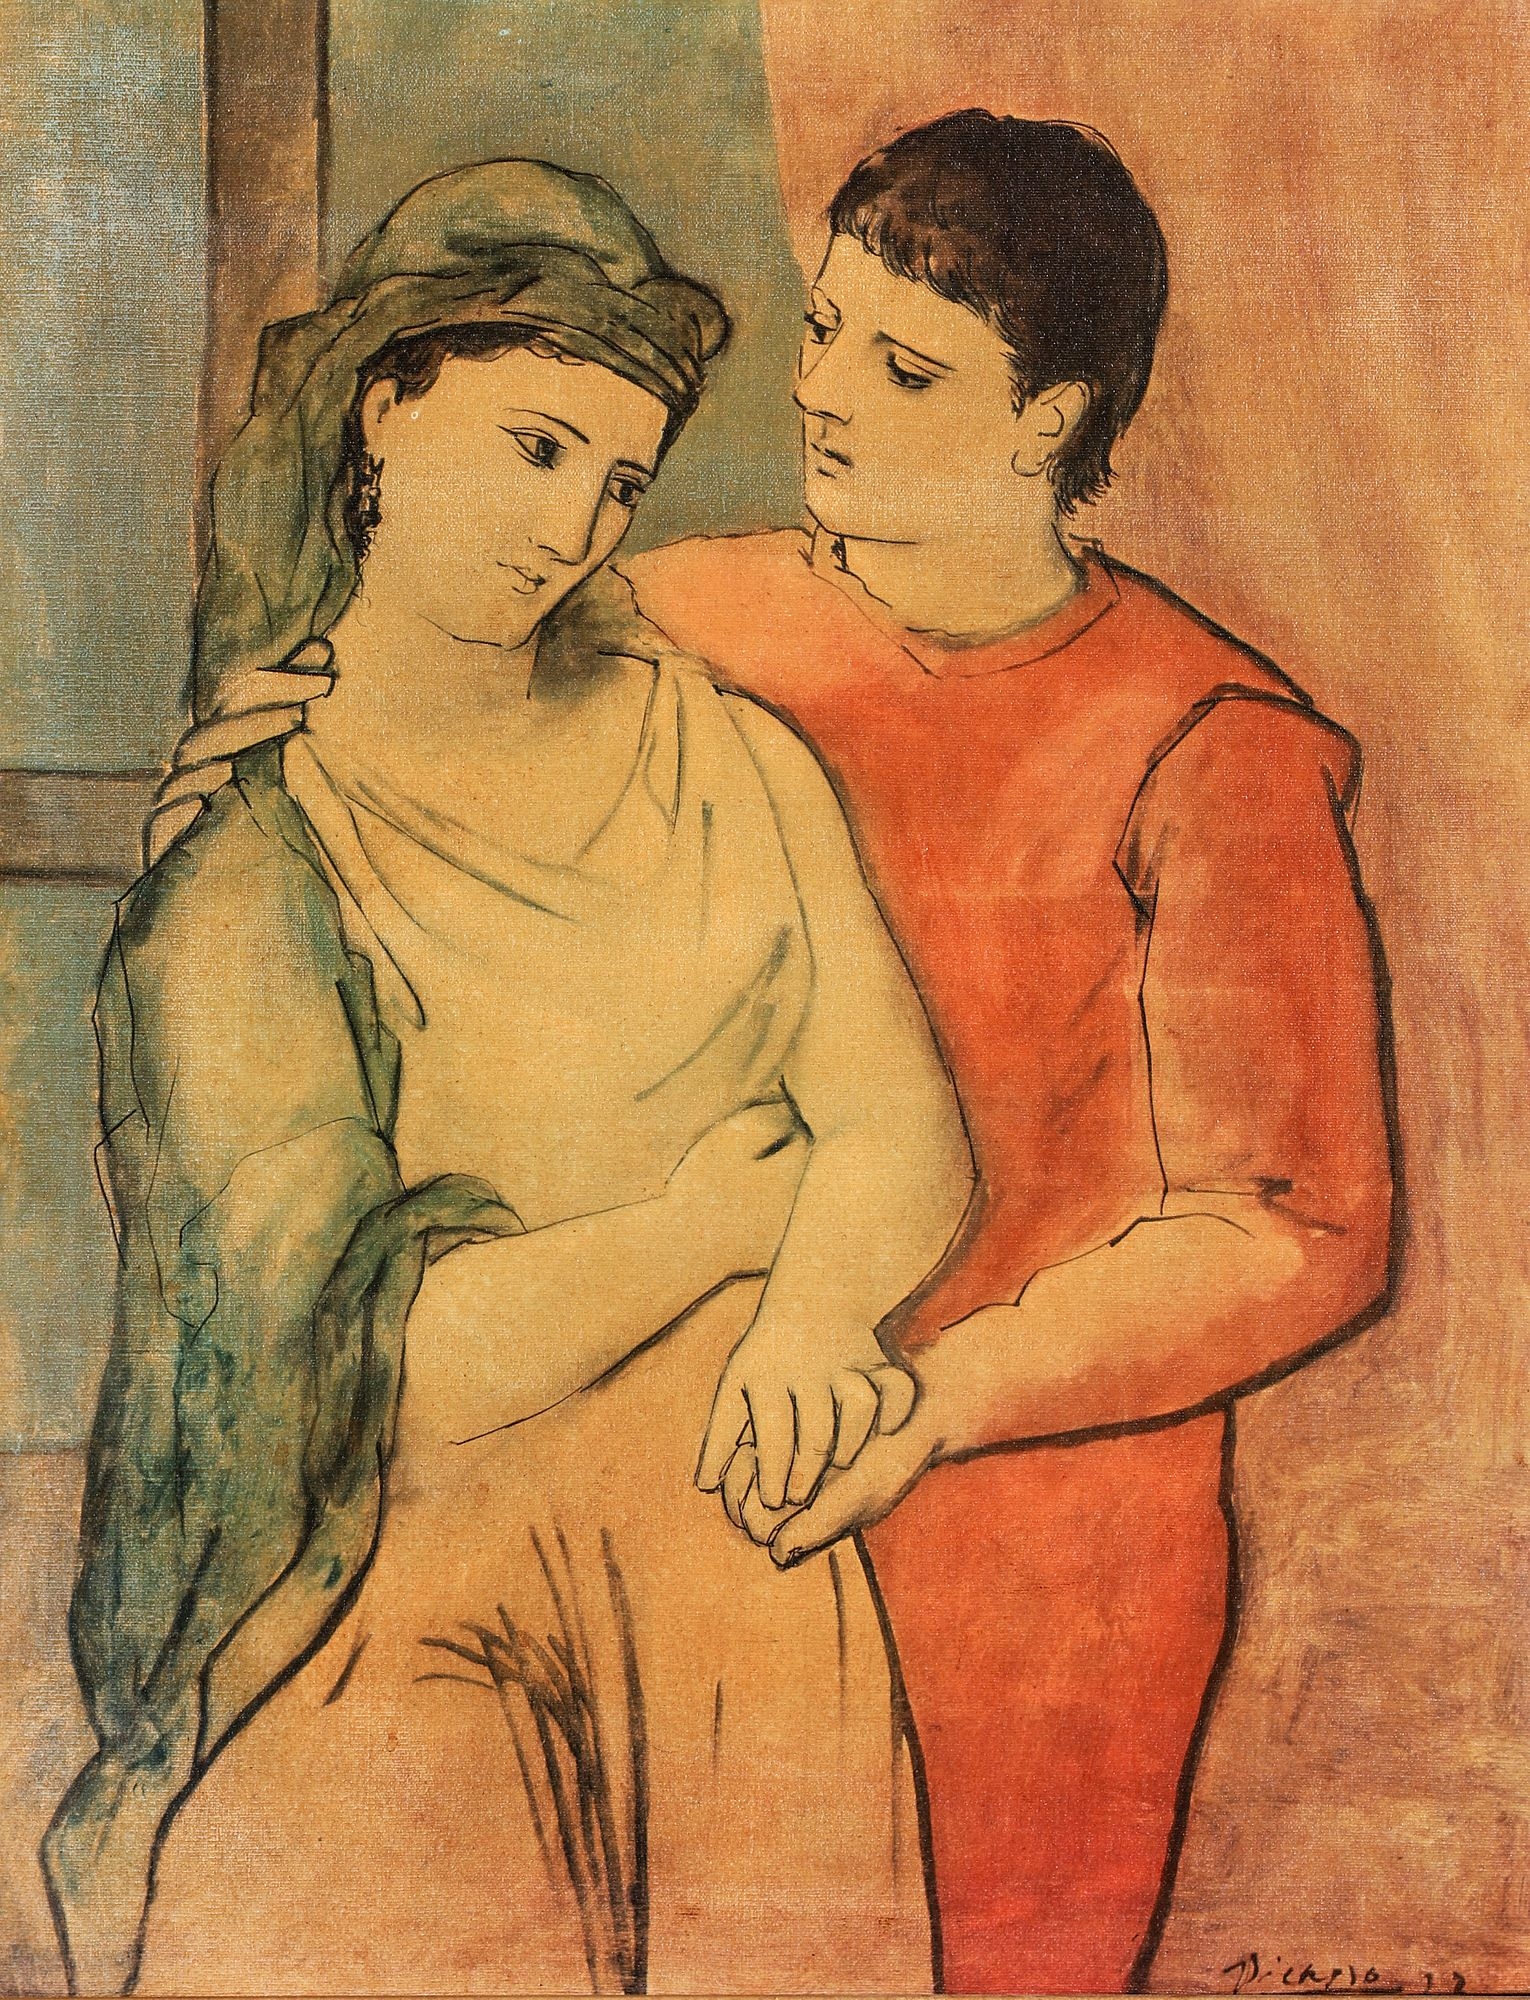 The Lovers by Pablo Picasso, 20th century